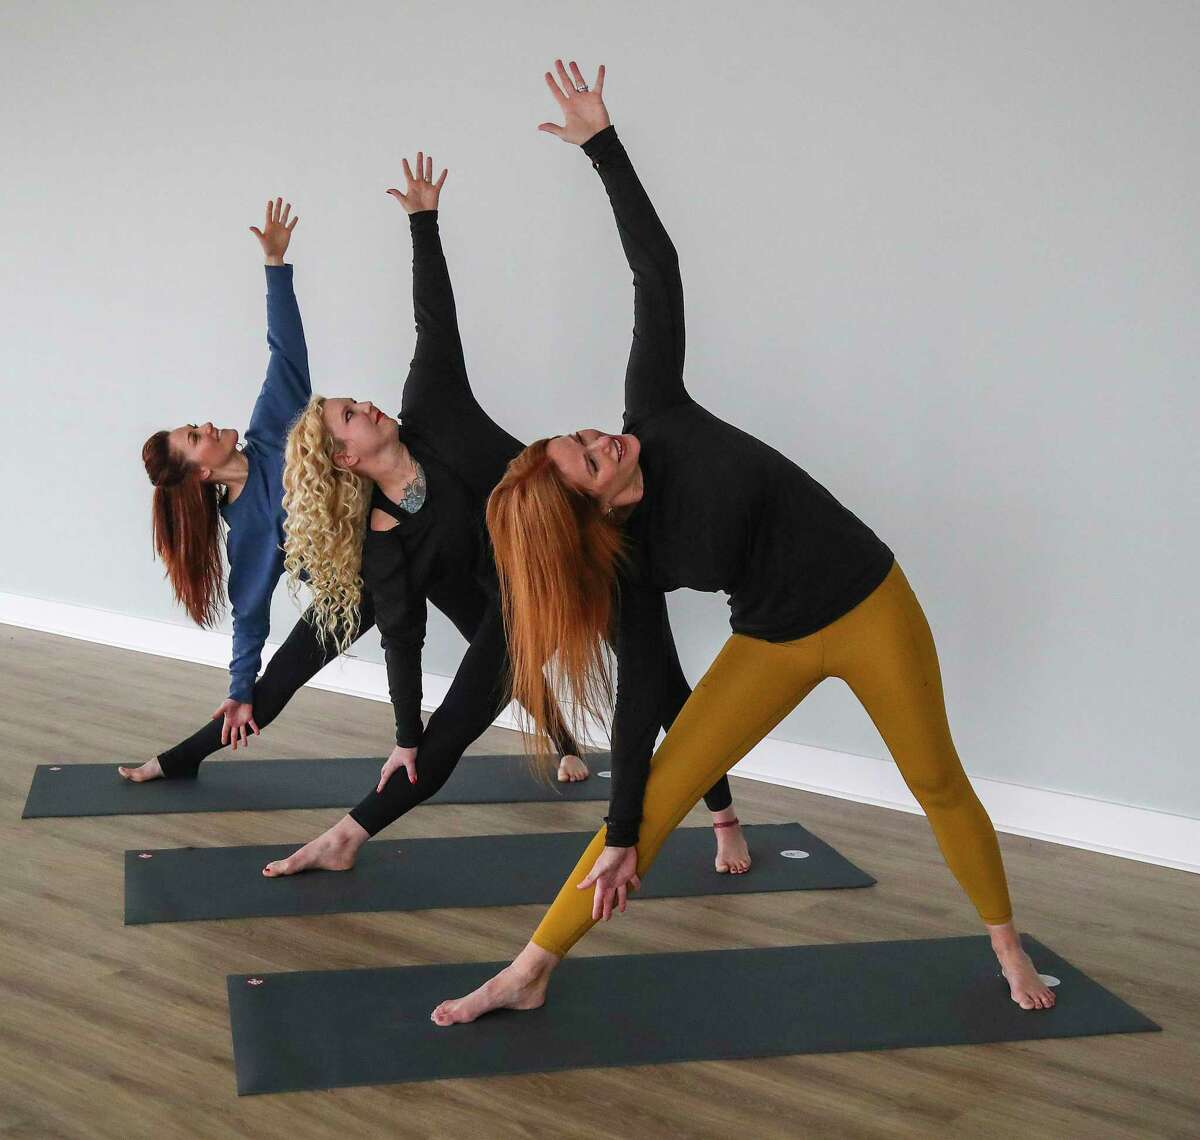 Amanda Hale, owner of Yoga Tres, forground, demonstrates a Triange pose with Heather Heft, center and Stacie Zollars, far left.